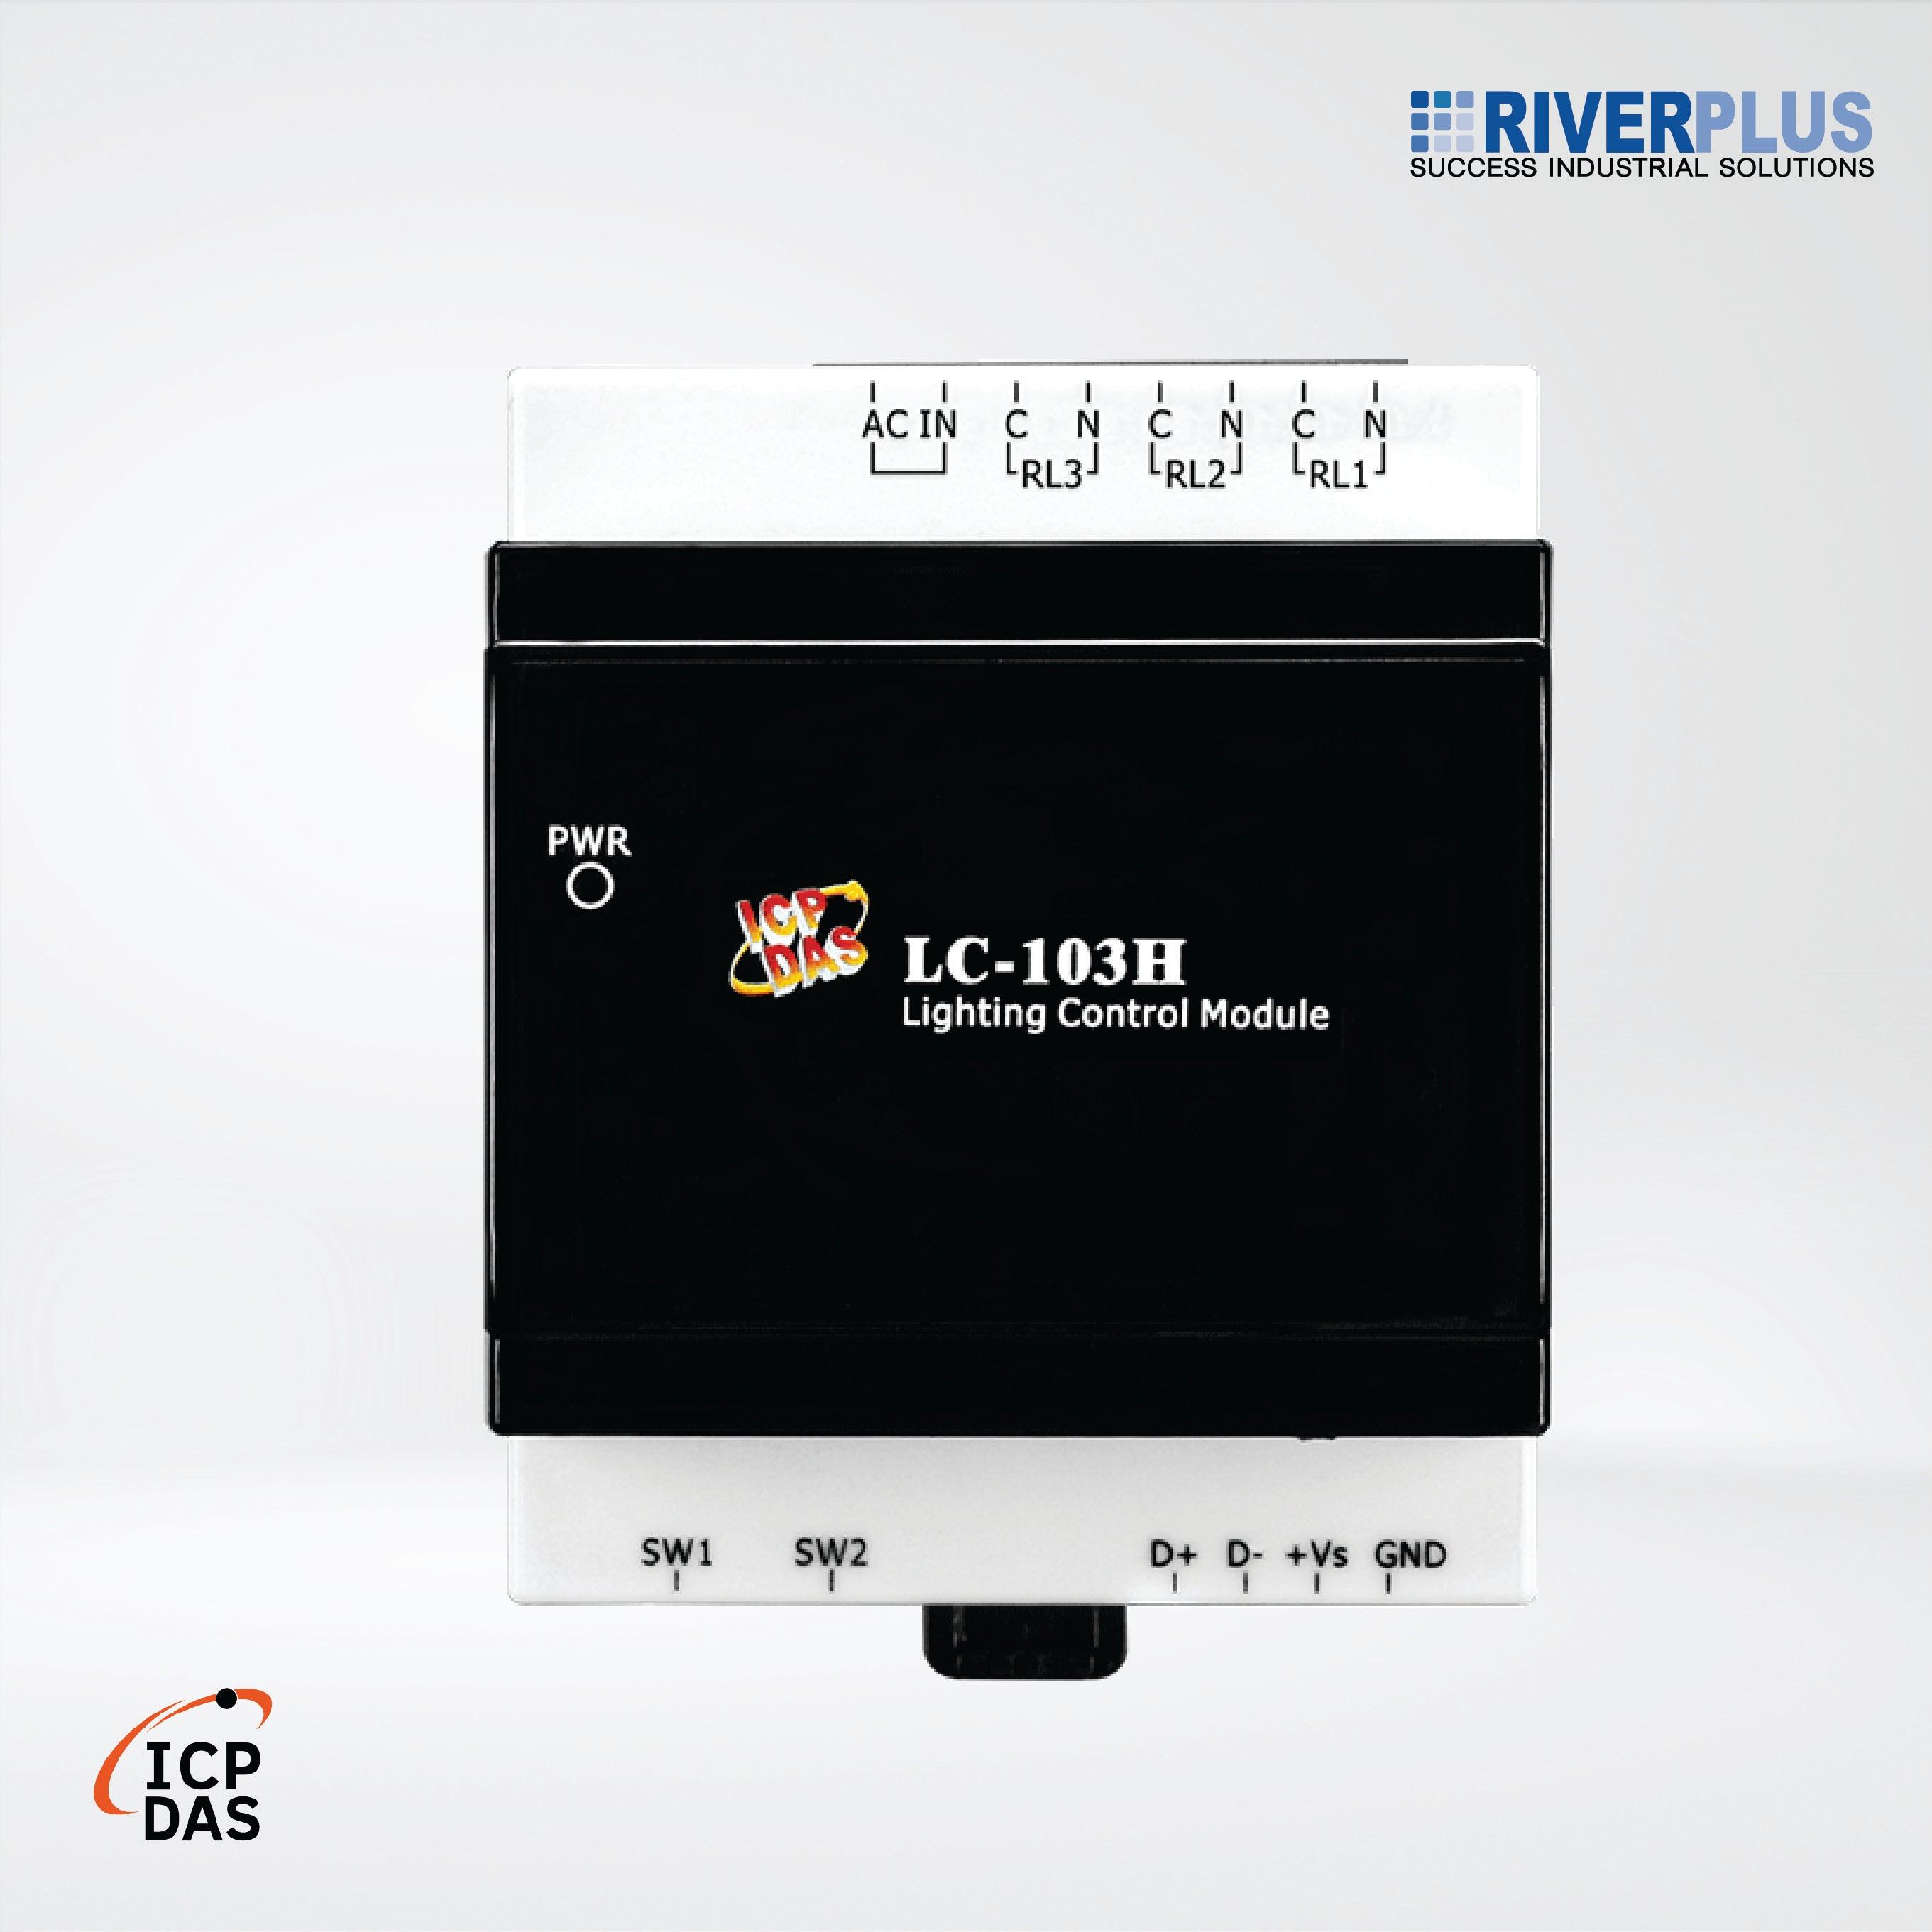 LC-103H 1-channel AC Digital Input and 3-channel Relay Output Lighting Control Module - Riverplus